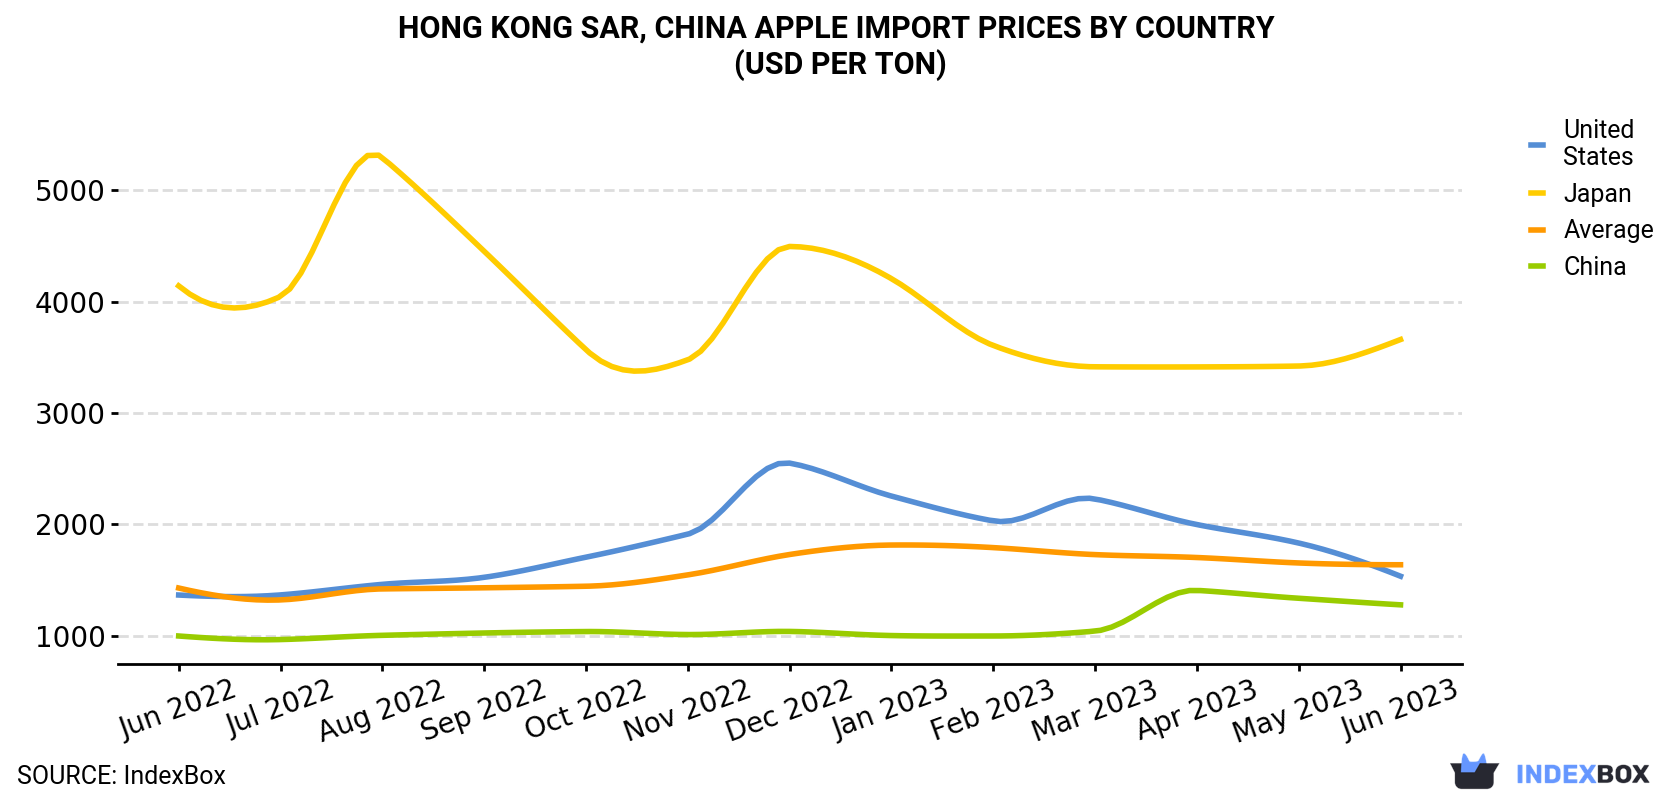 Hong Kong Apple Import Prices By Country (USD Per Ton)